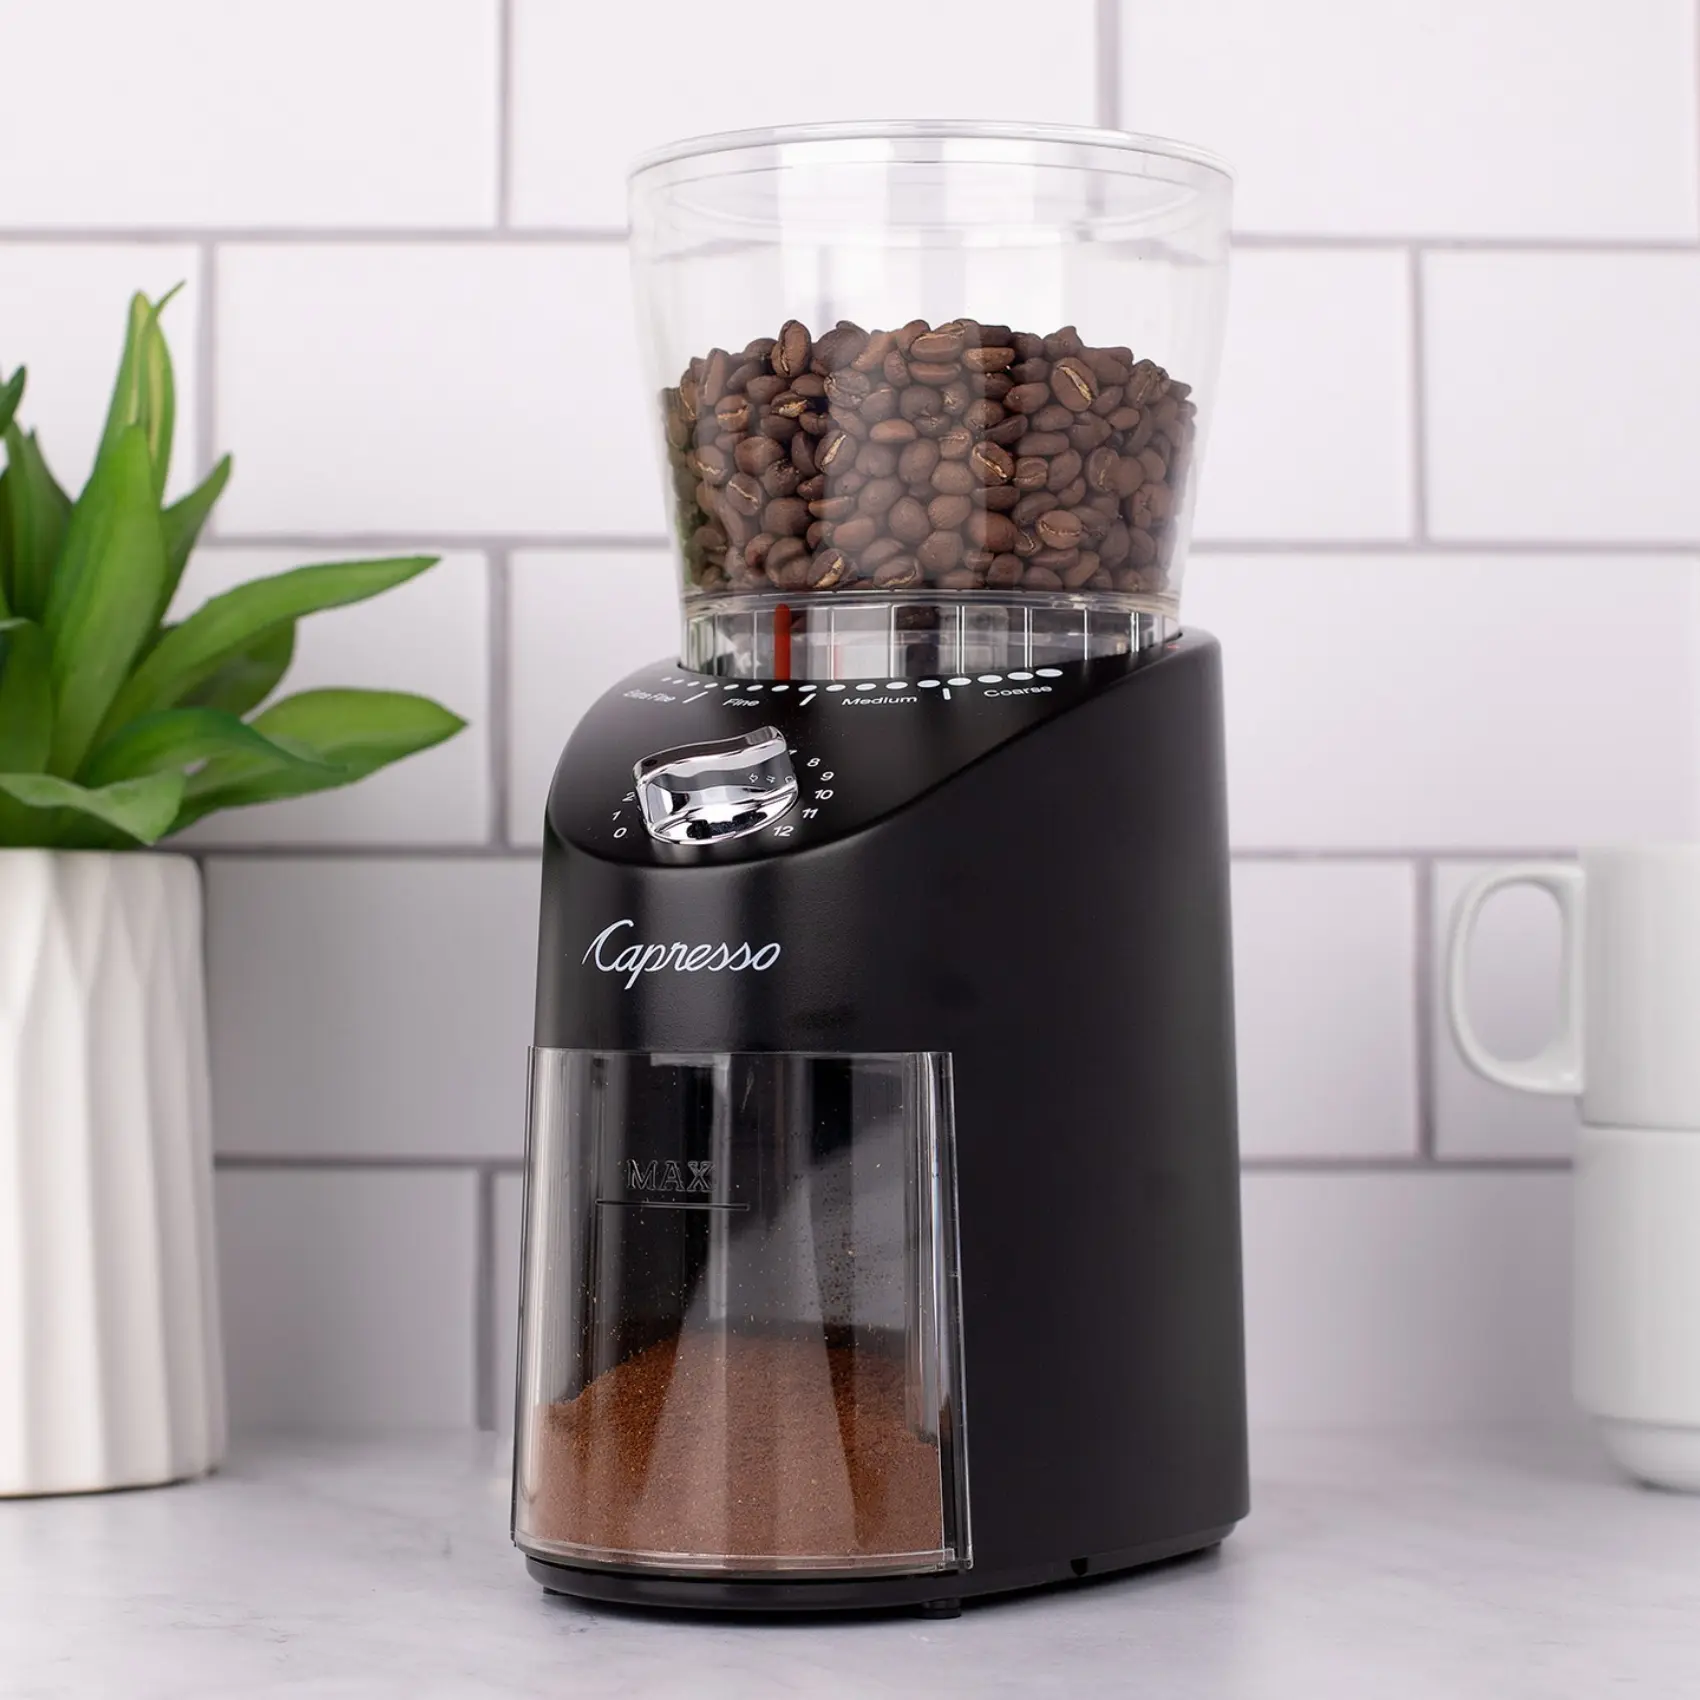 Krups Precision Plastic and Stainless Steel Flat Burr Grinder 12 Cup 110  Watts 12 Grind Settings, Drip, French Press, Espresso, Pour Over, Cold Brew  Black